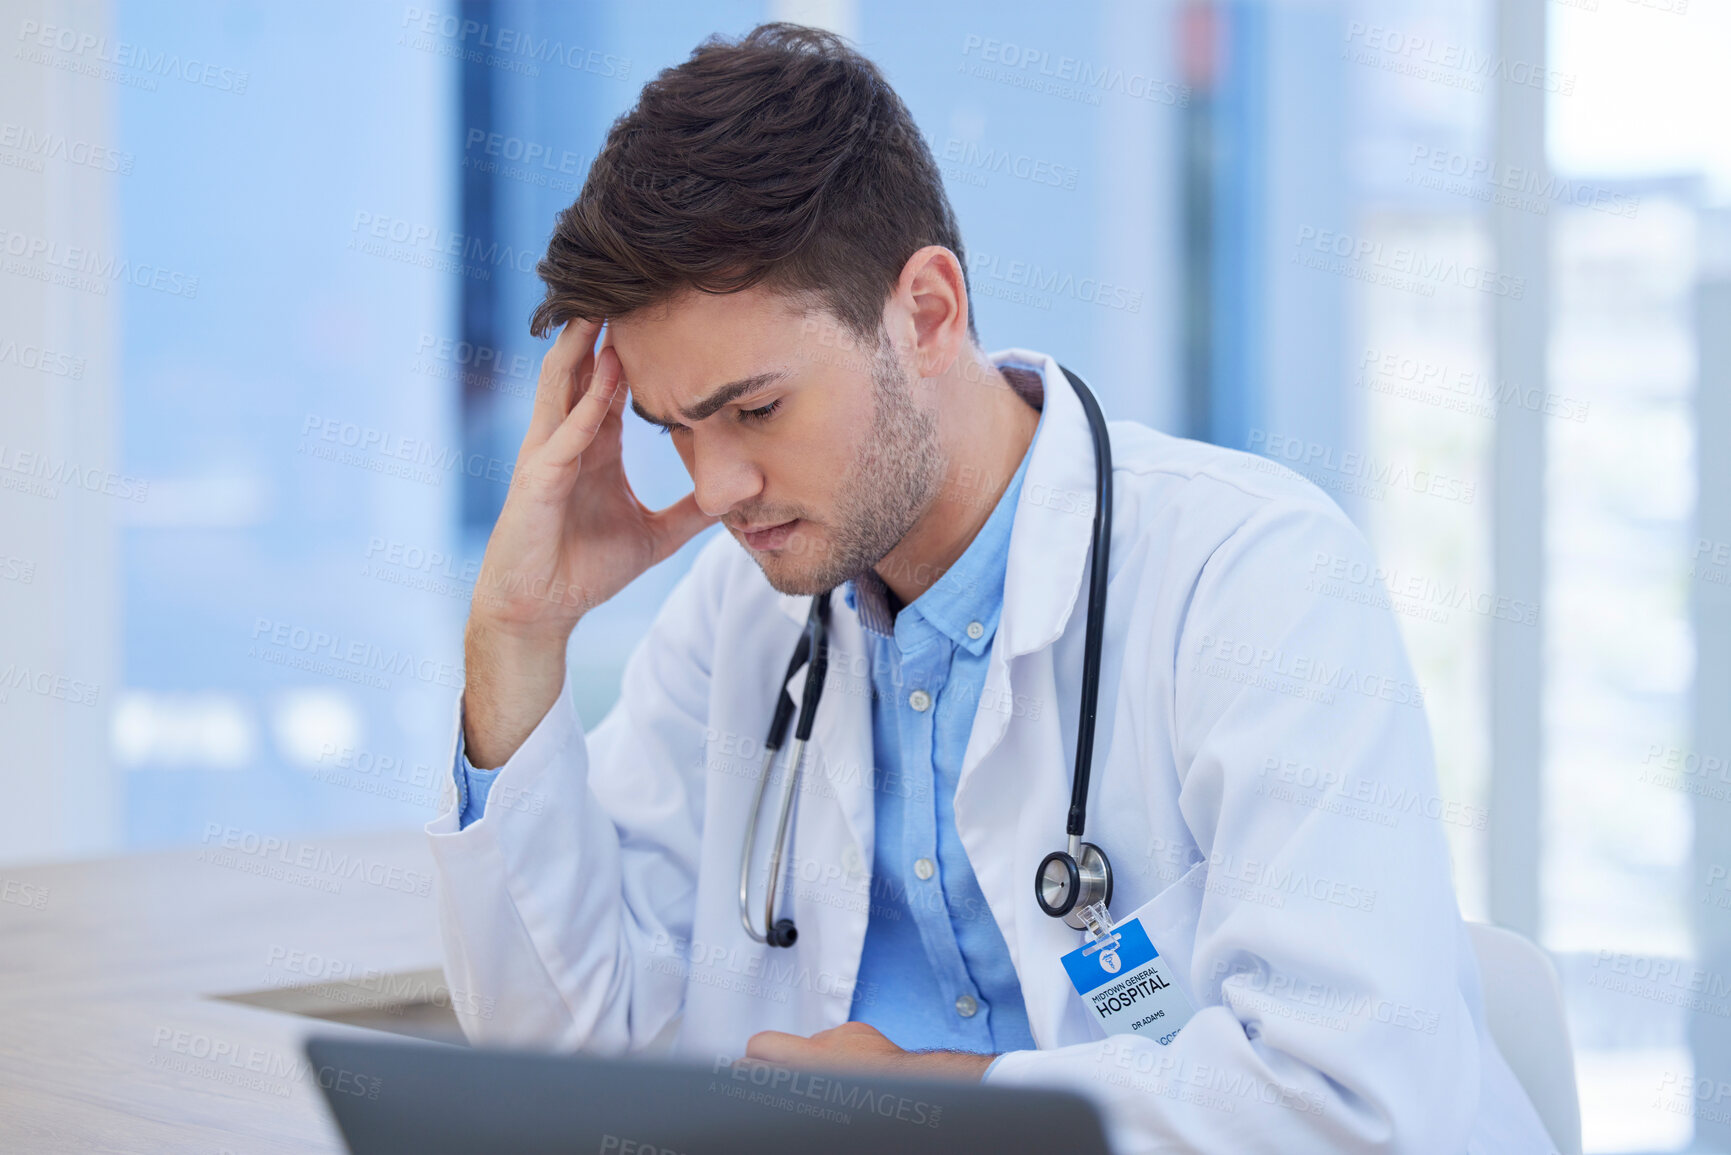 Buy stock photo Man, doctor or stress headache in hospital data analysis, test results analytics or surgery planning. Thinking healthcare worker, anxiety or mental health burnout on medical clinic laptop technology